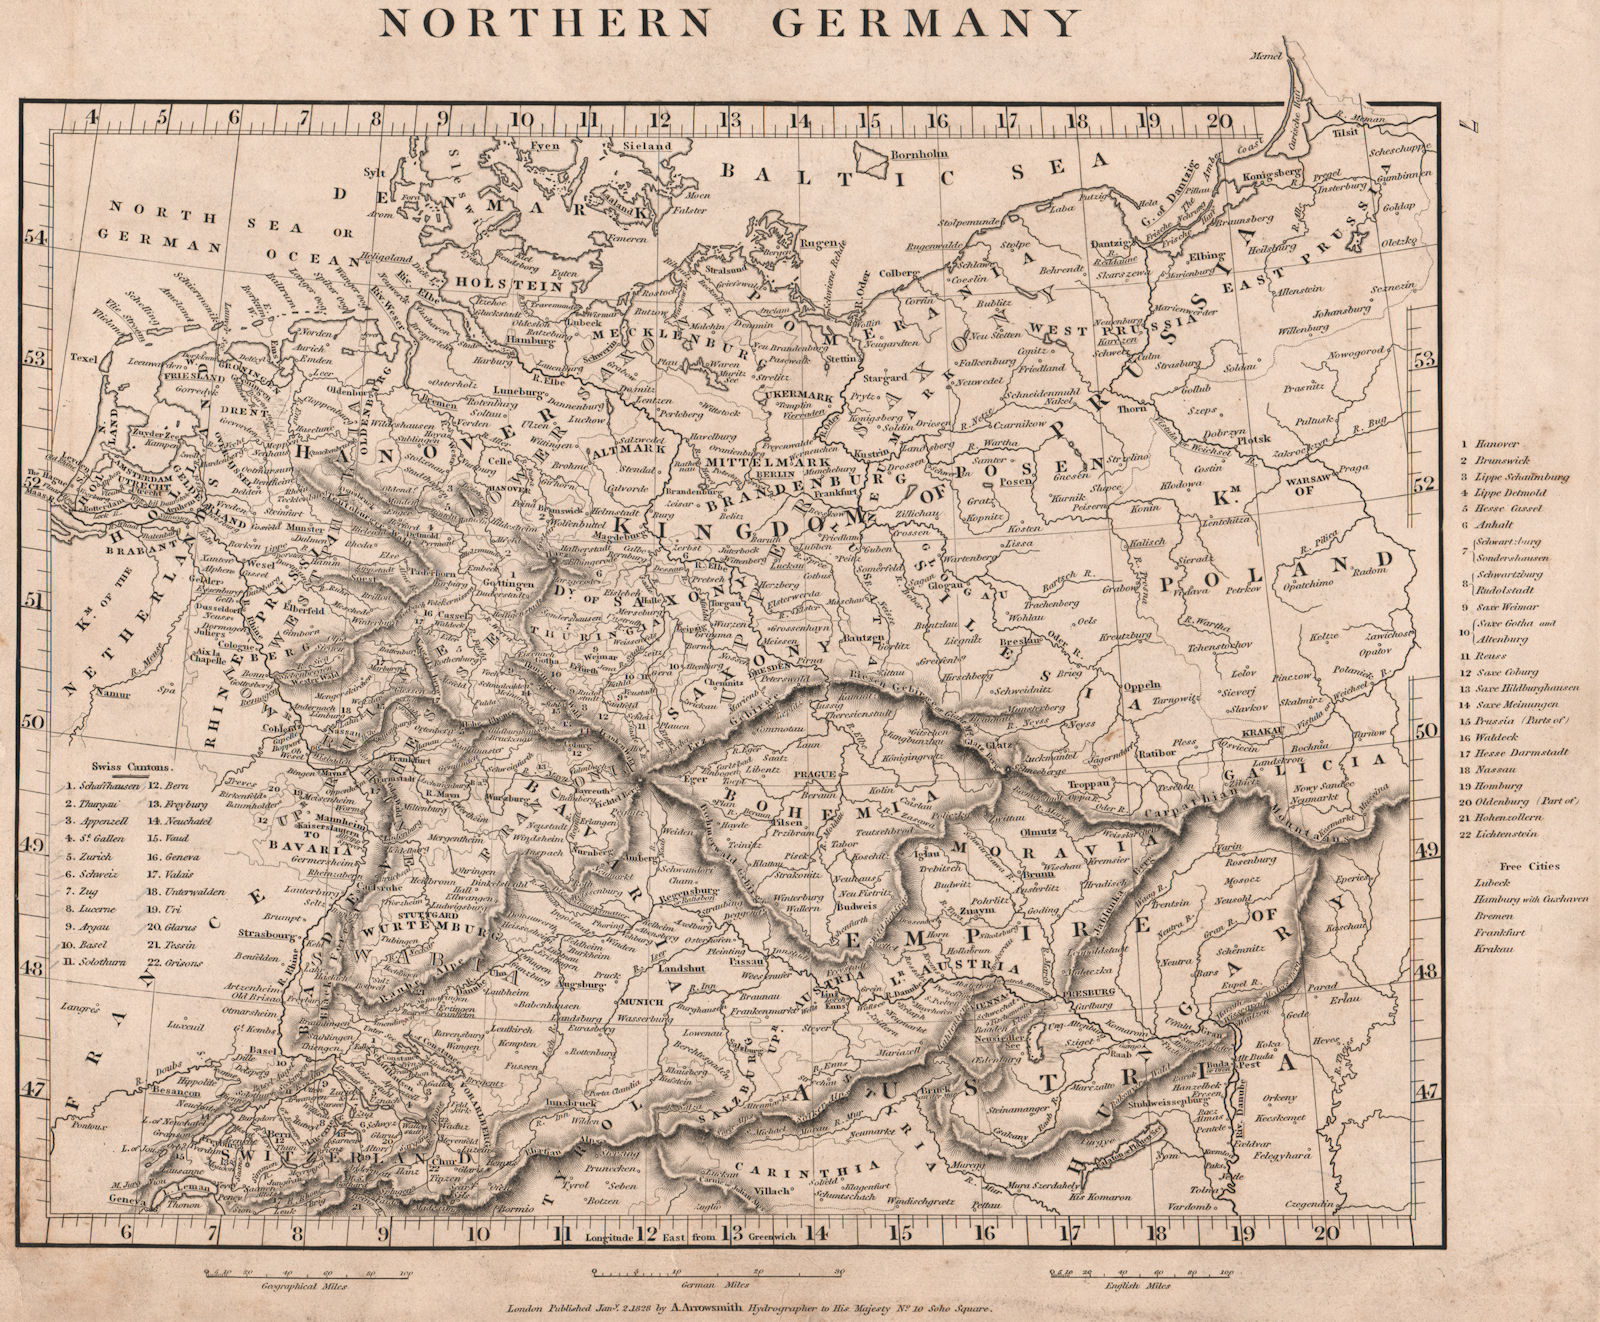 Associate Product NORTHERN GERMANY. States. Free Cities. Switzerland Austria. ARROWSMITH 1828 map